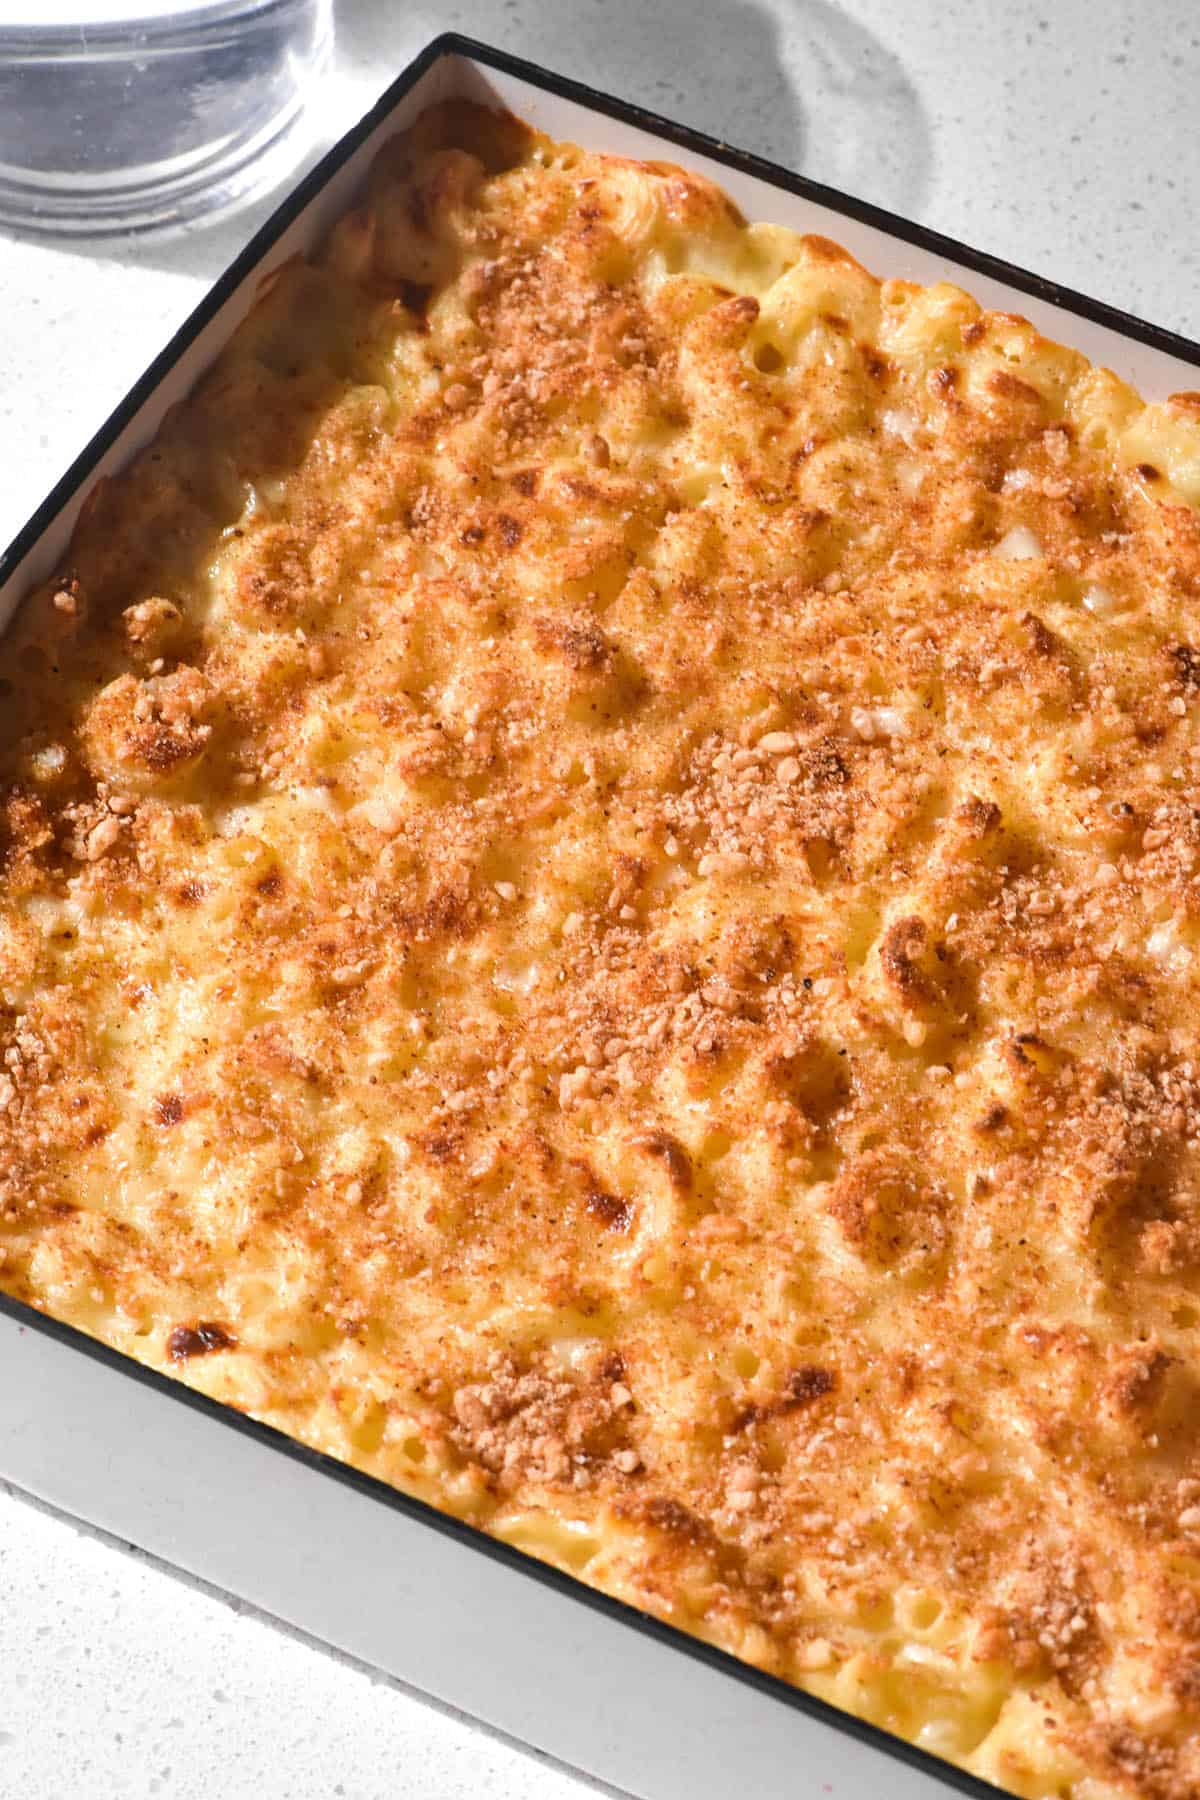 An aerial brightly lit image of a low FODMAP mac and cheese bake in a white baking dish atop a white stone benchtop.